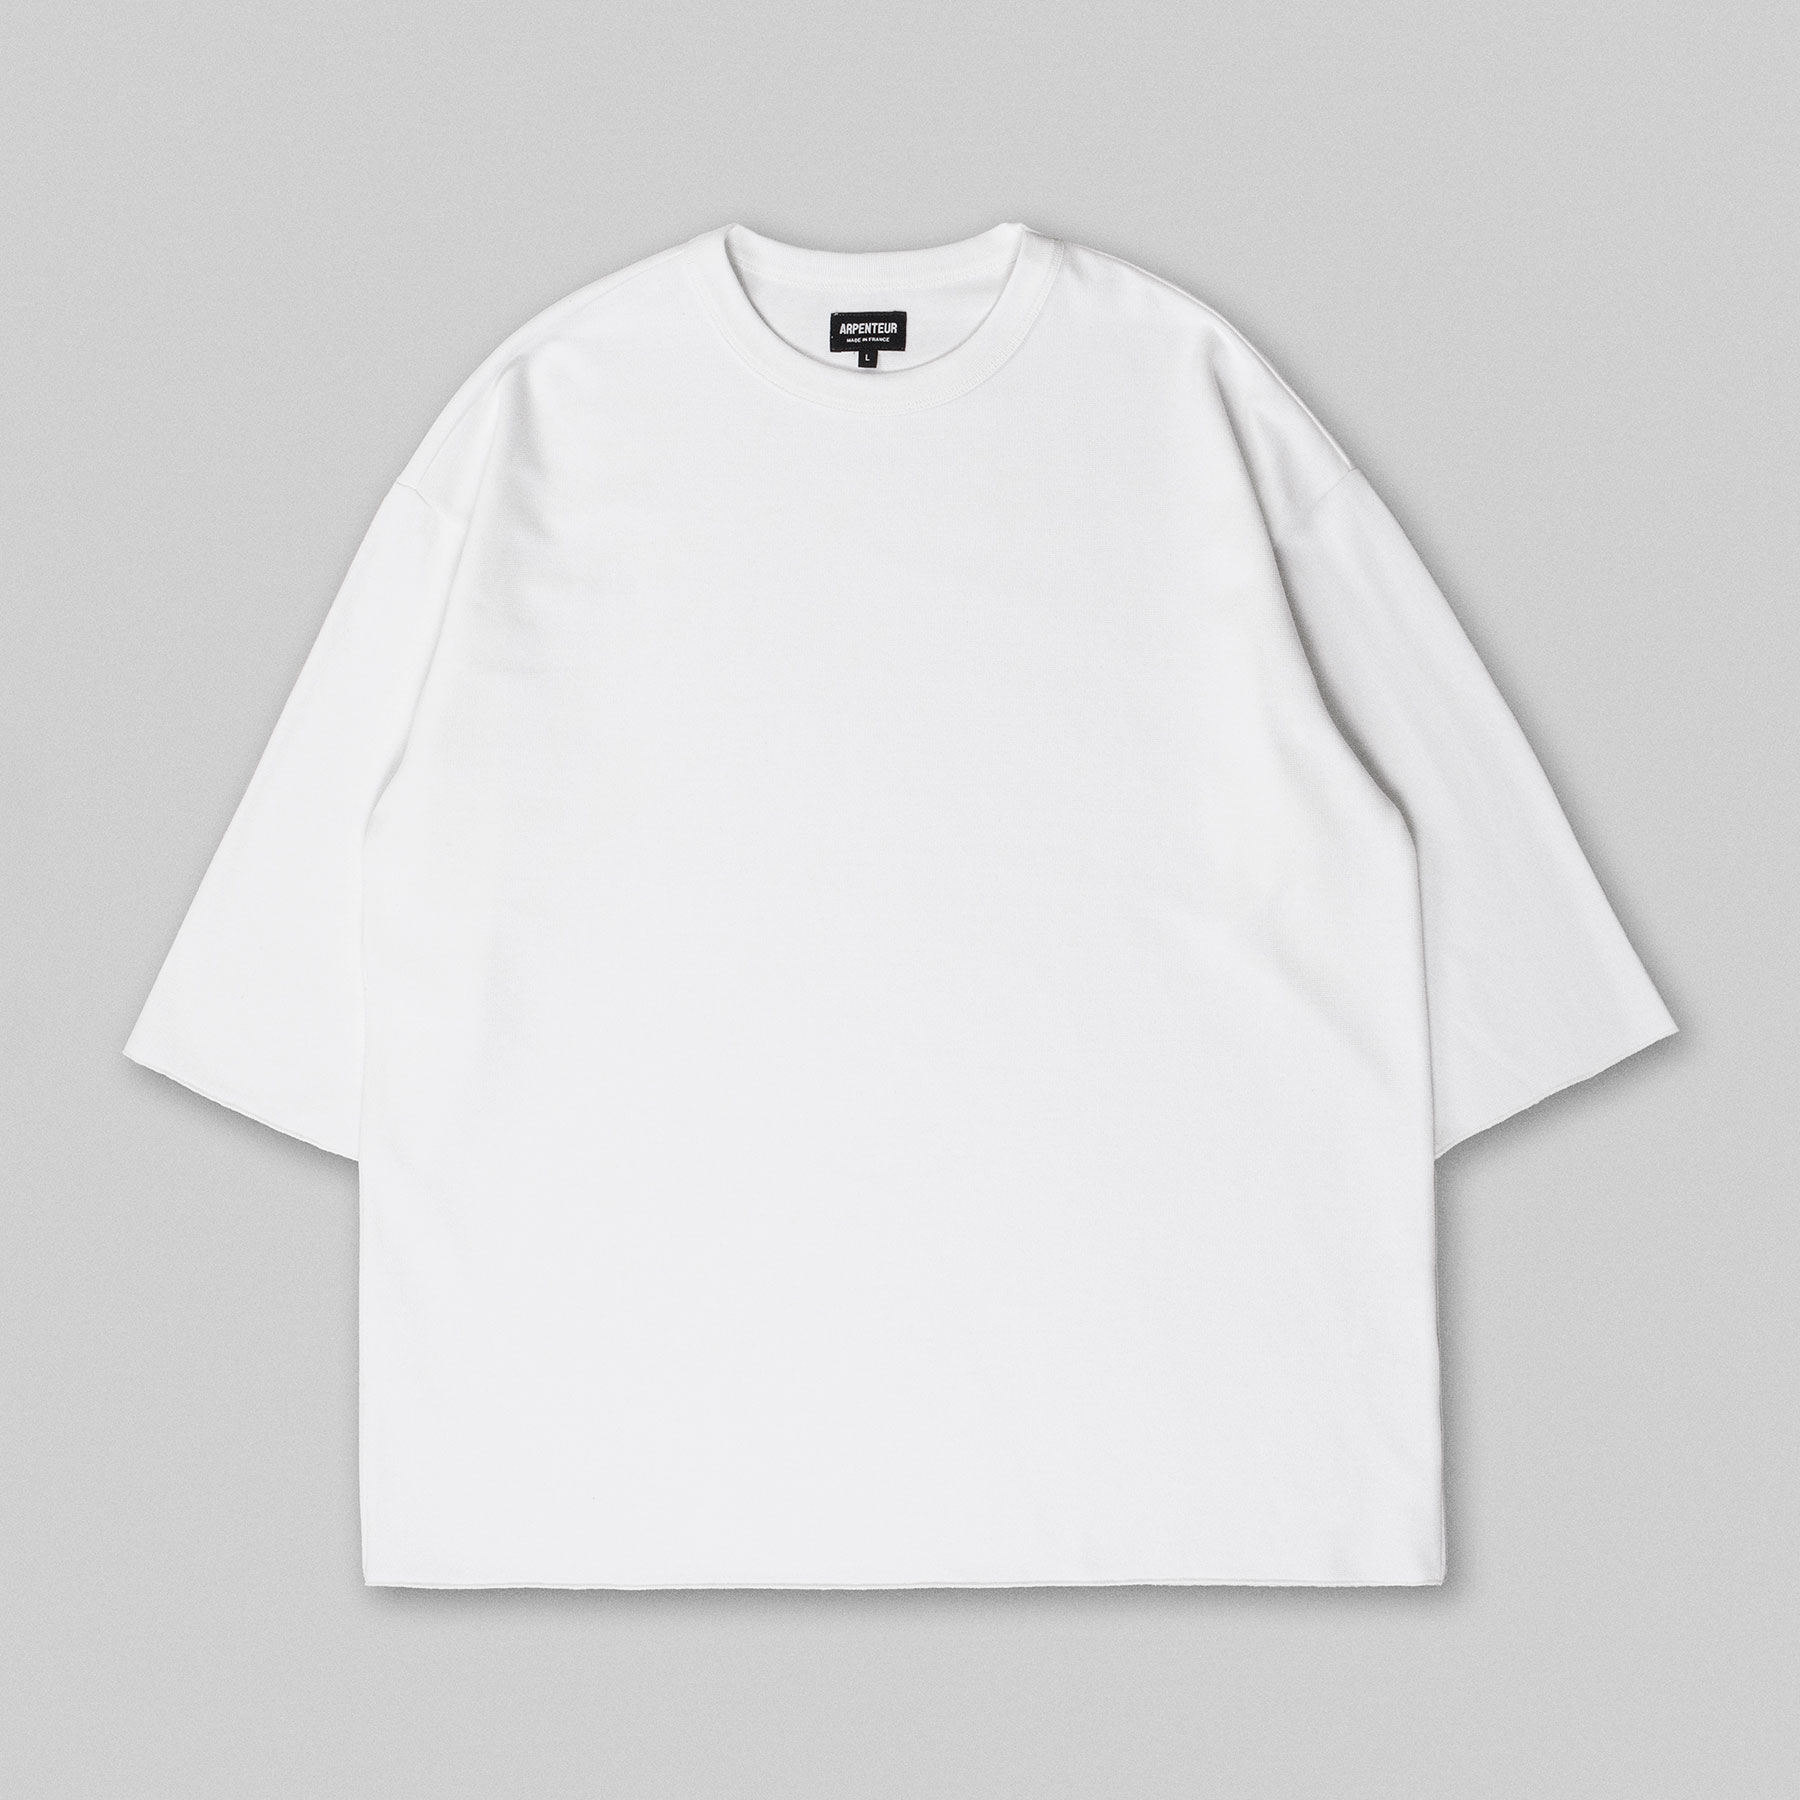 MARINIERE t-shirt by Arpenteur in White color